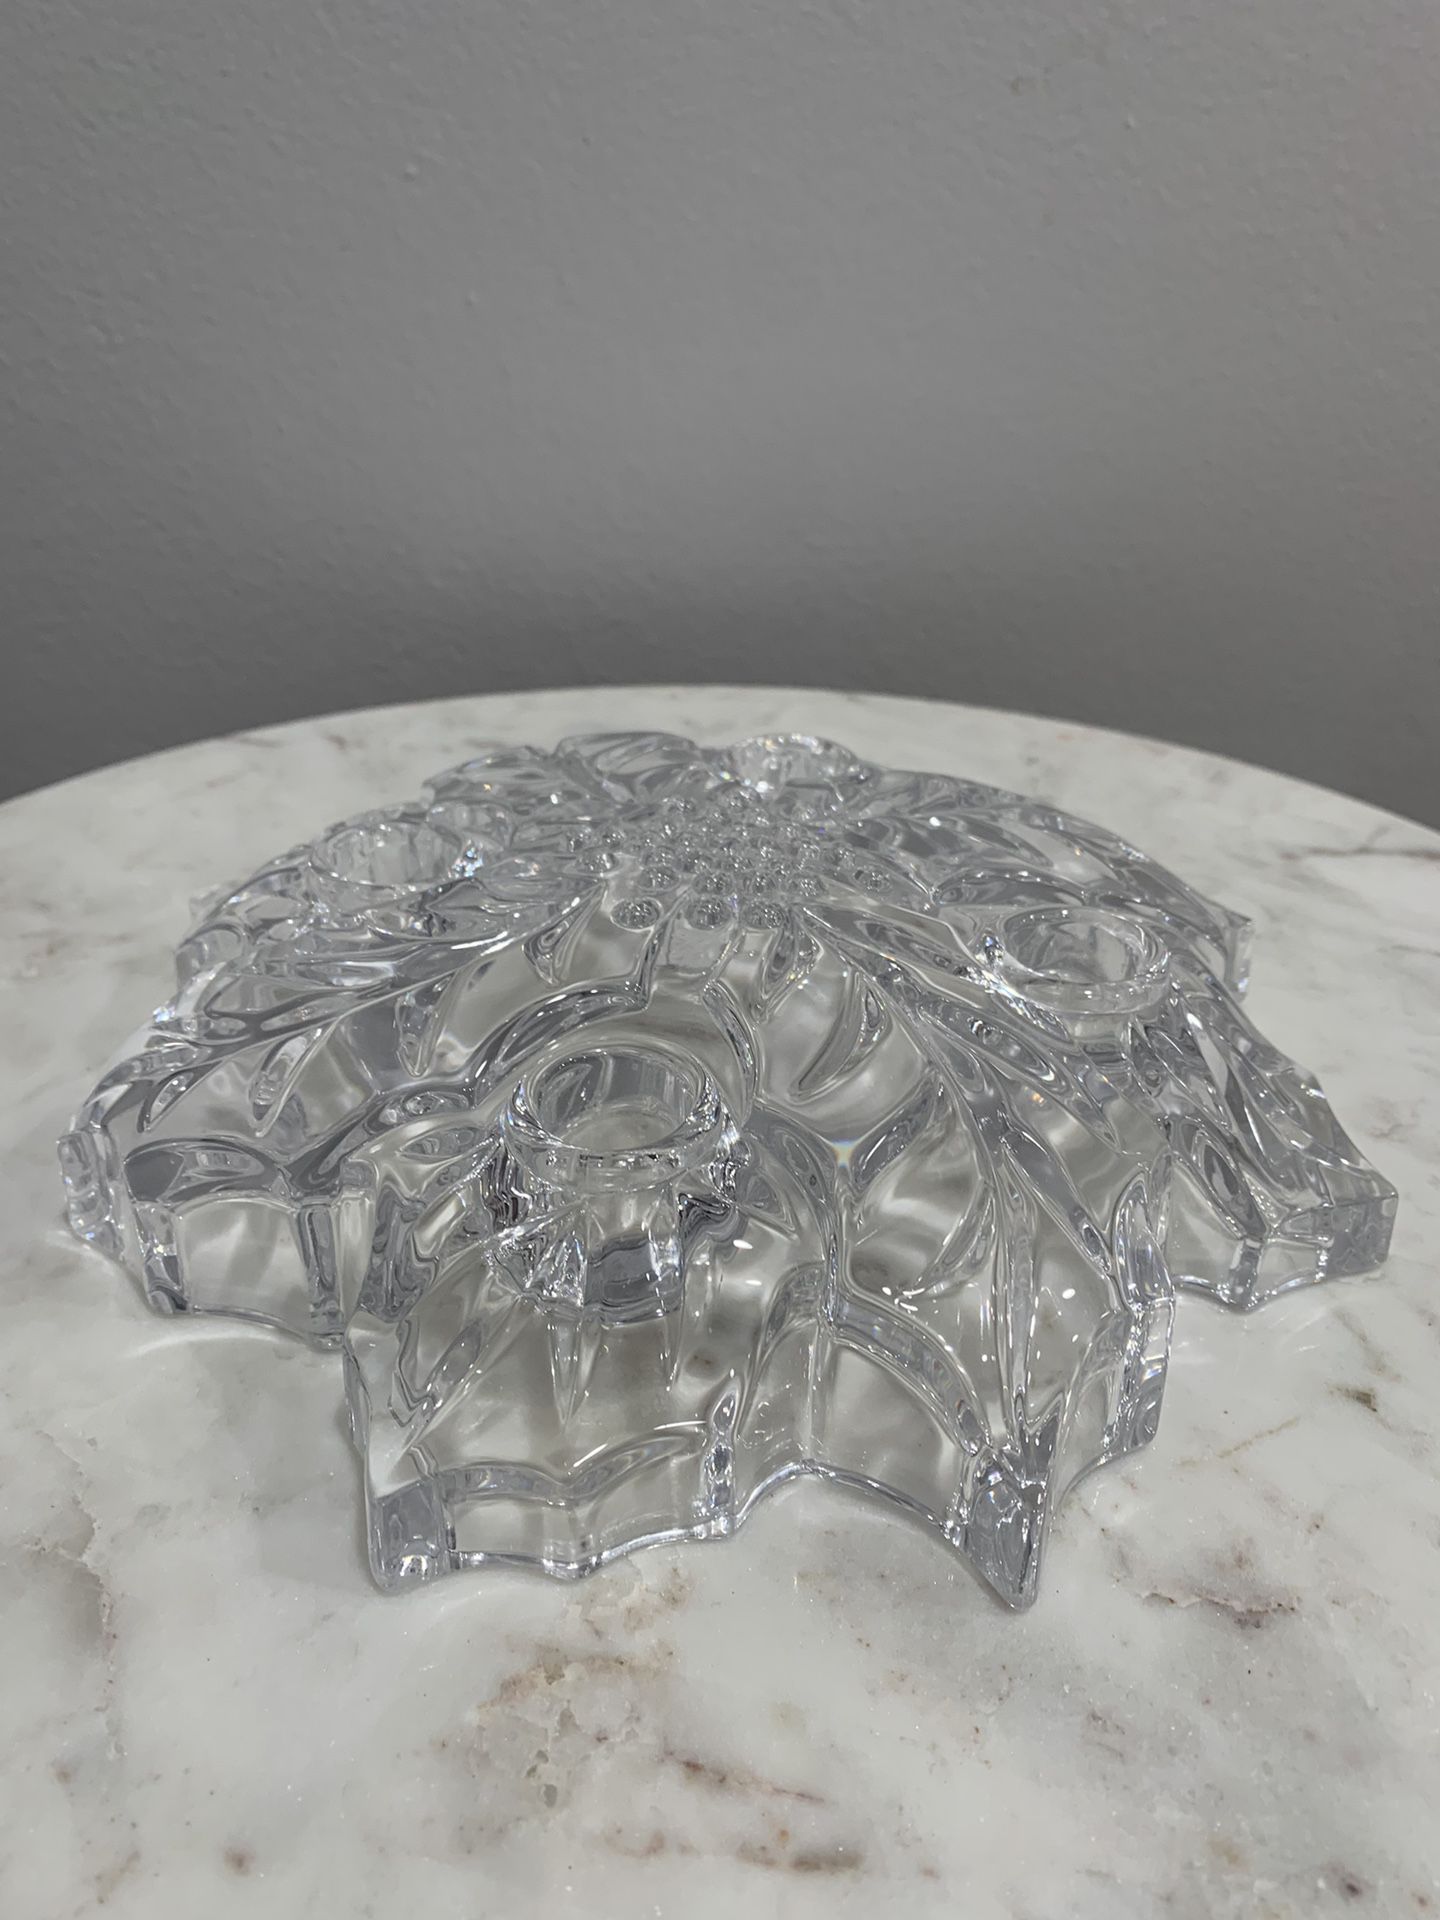 Marquis Waterford Crystal Wreath Candle Holder Made In Germany 8.5"